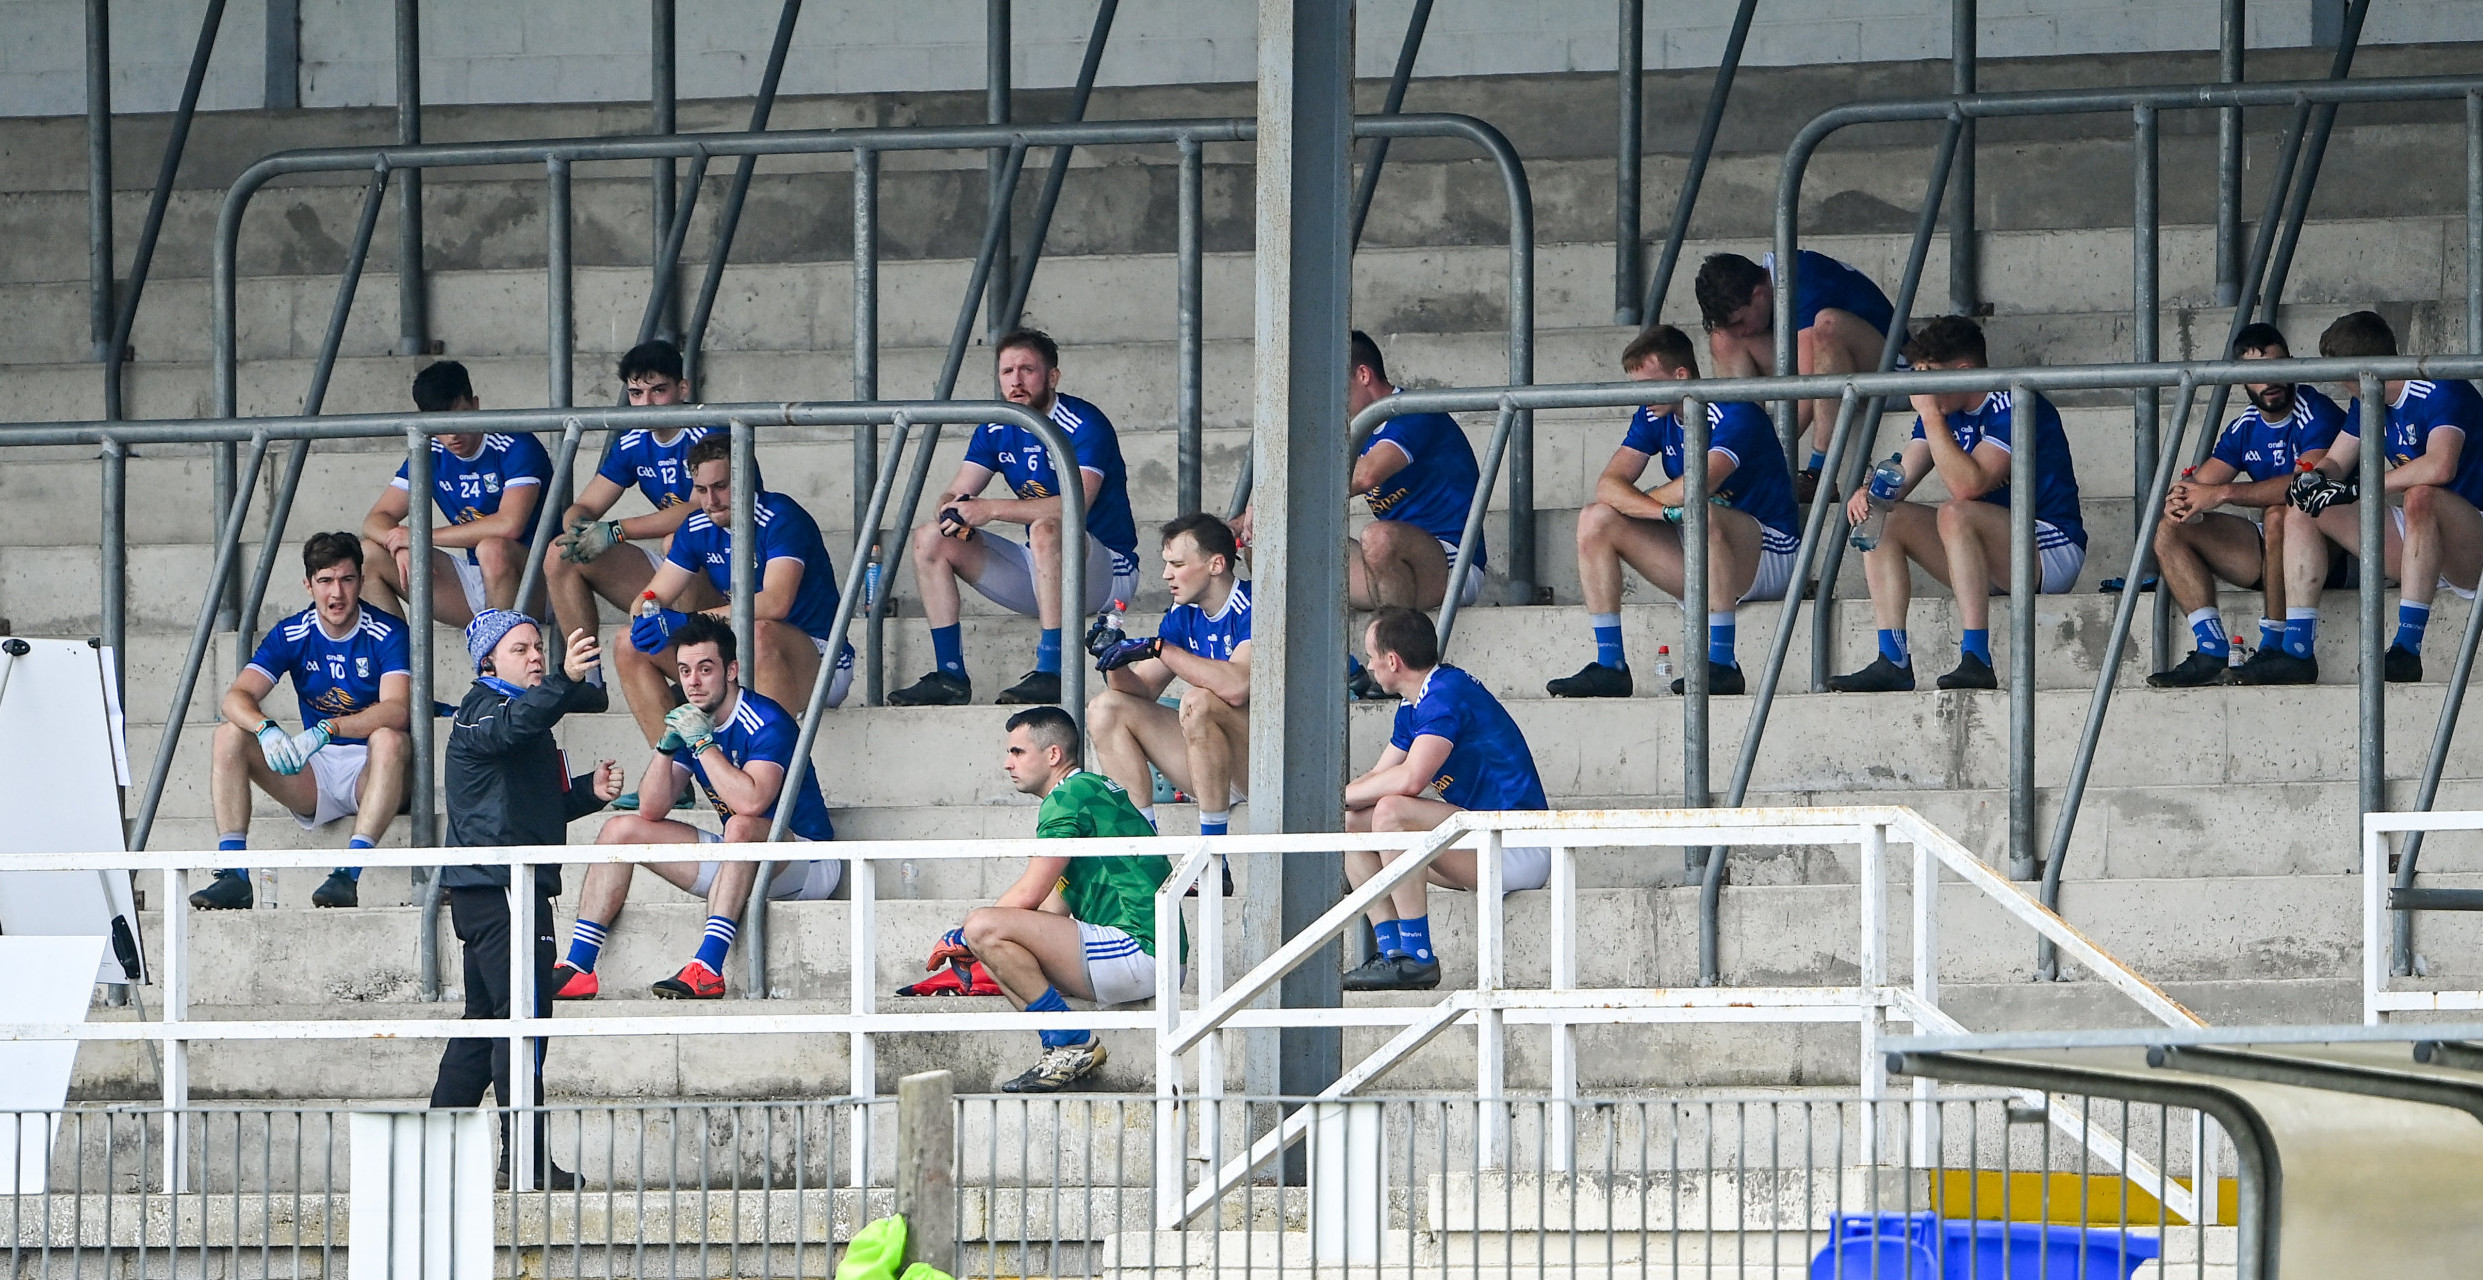 No time to dwell on league for Cavan boss Graham